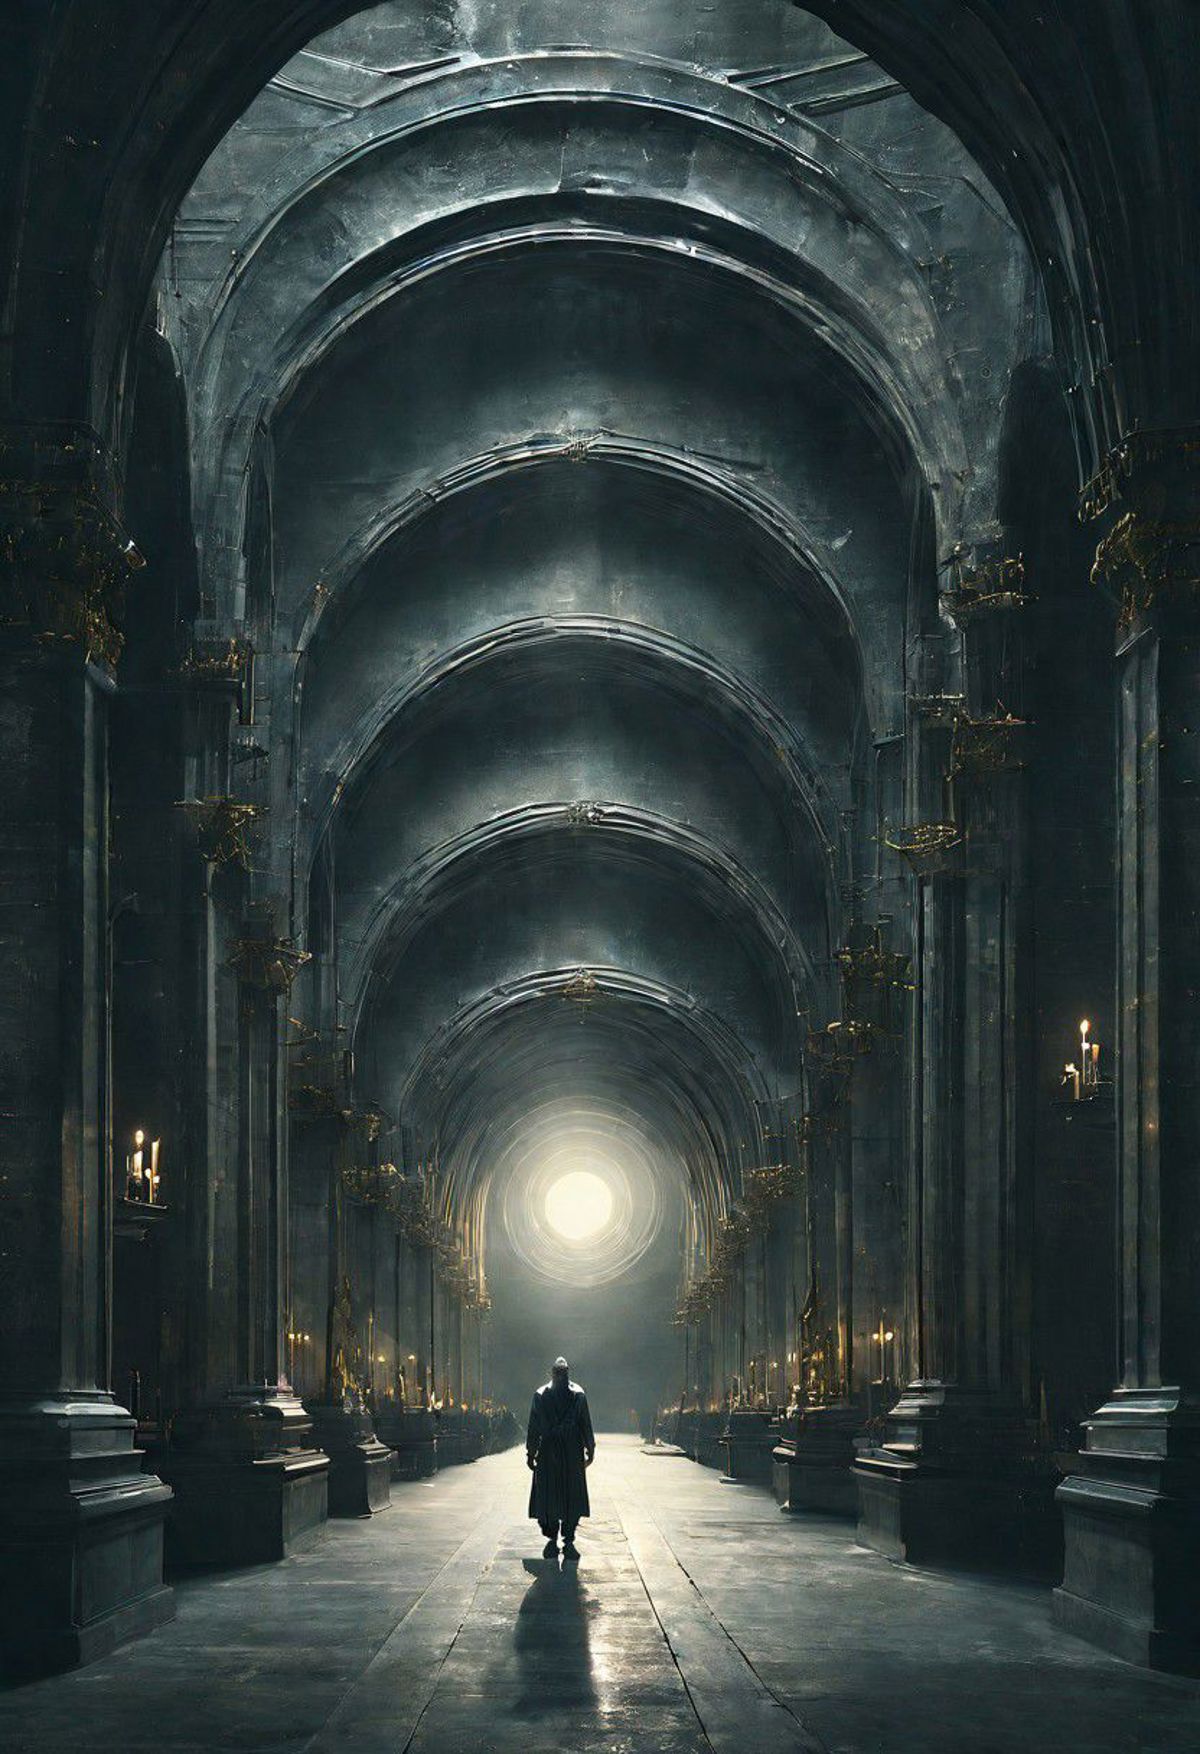 A man walking through a dimly lit, cathedral-like building with arched ceilings and multiple pillars.